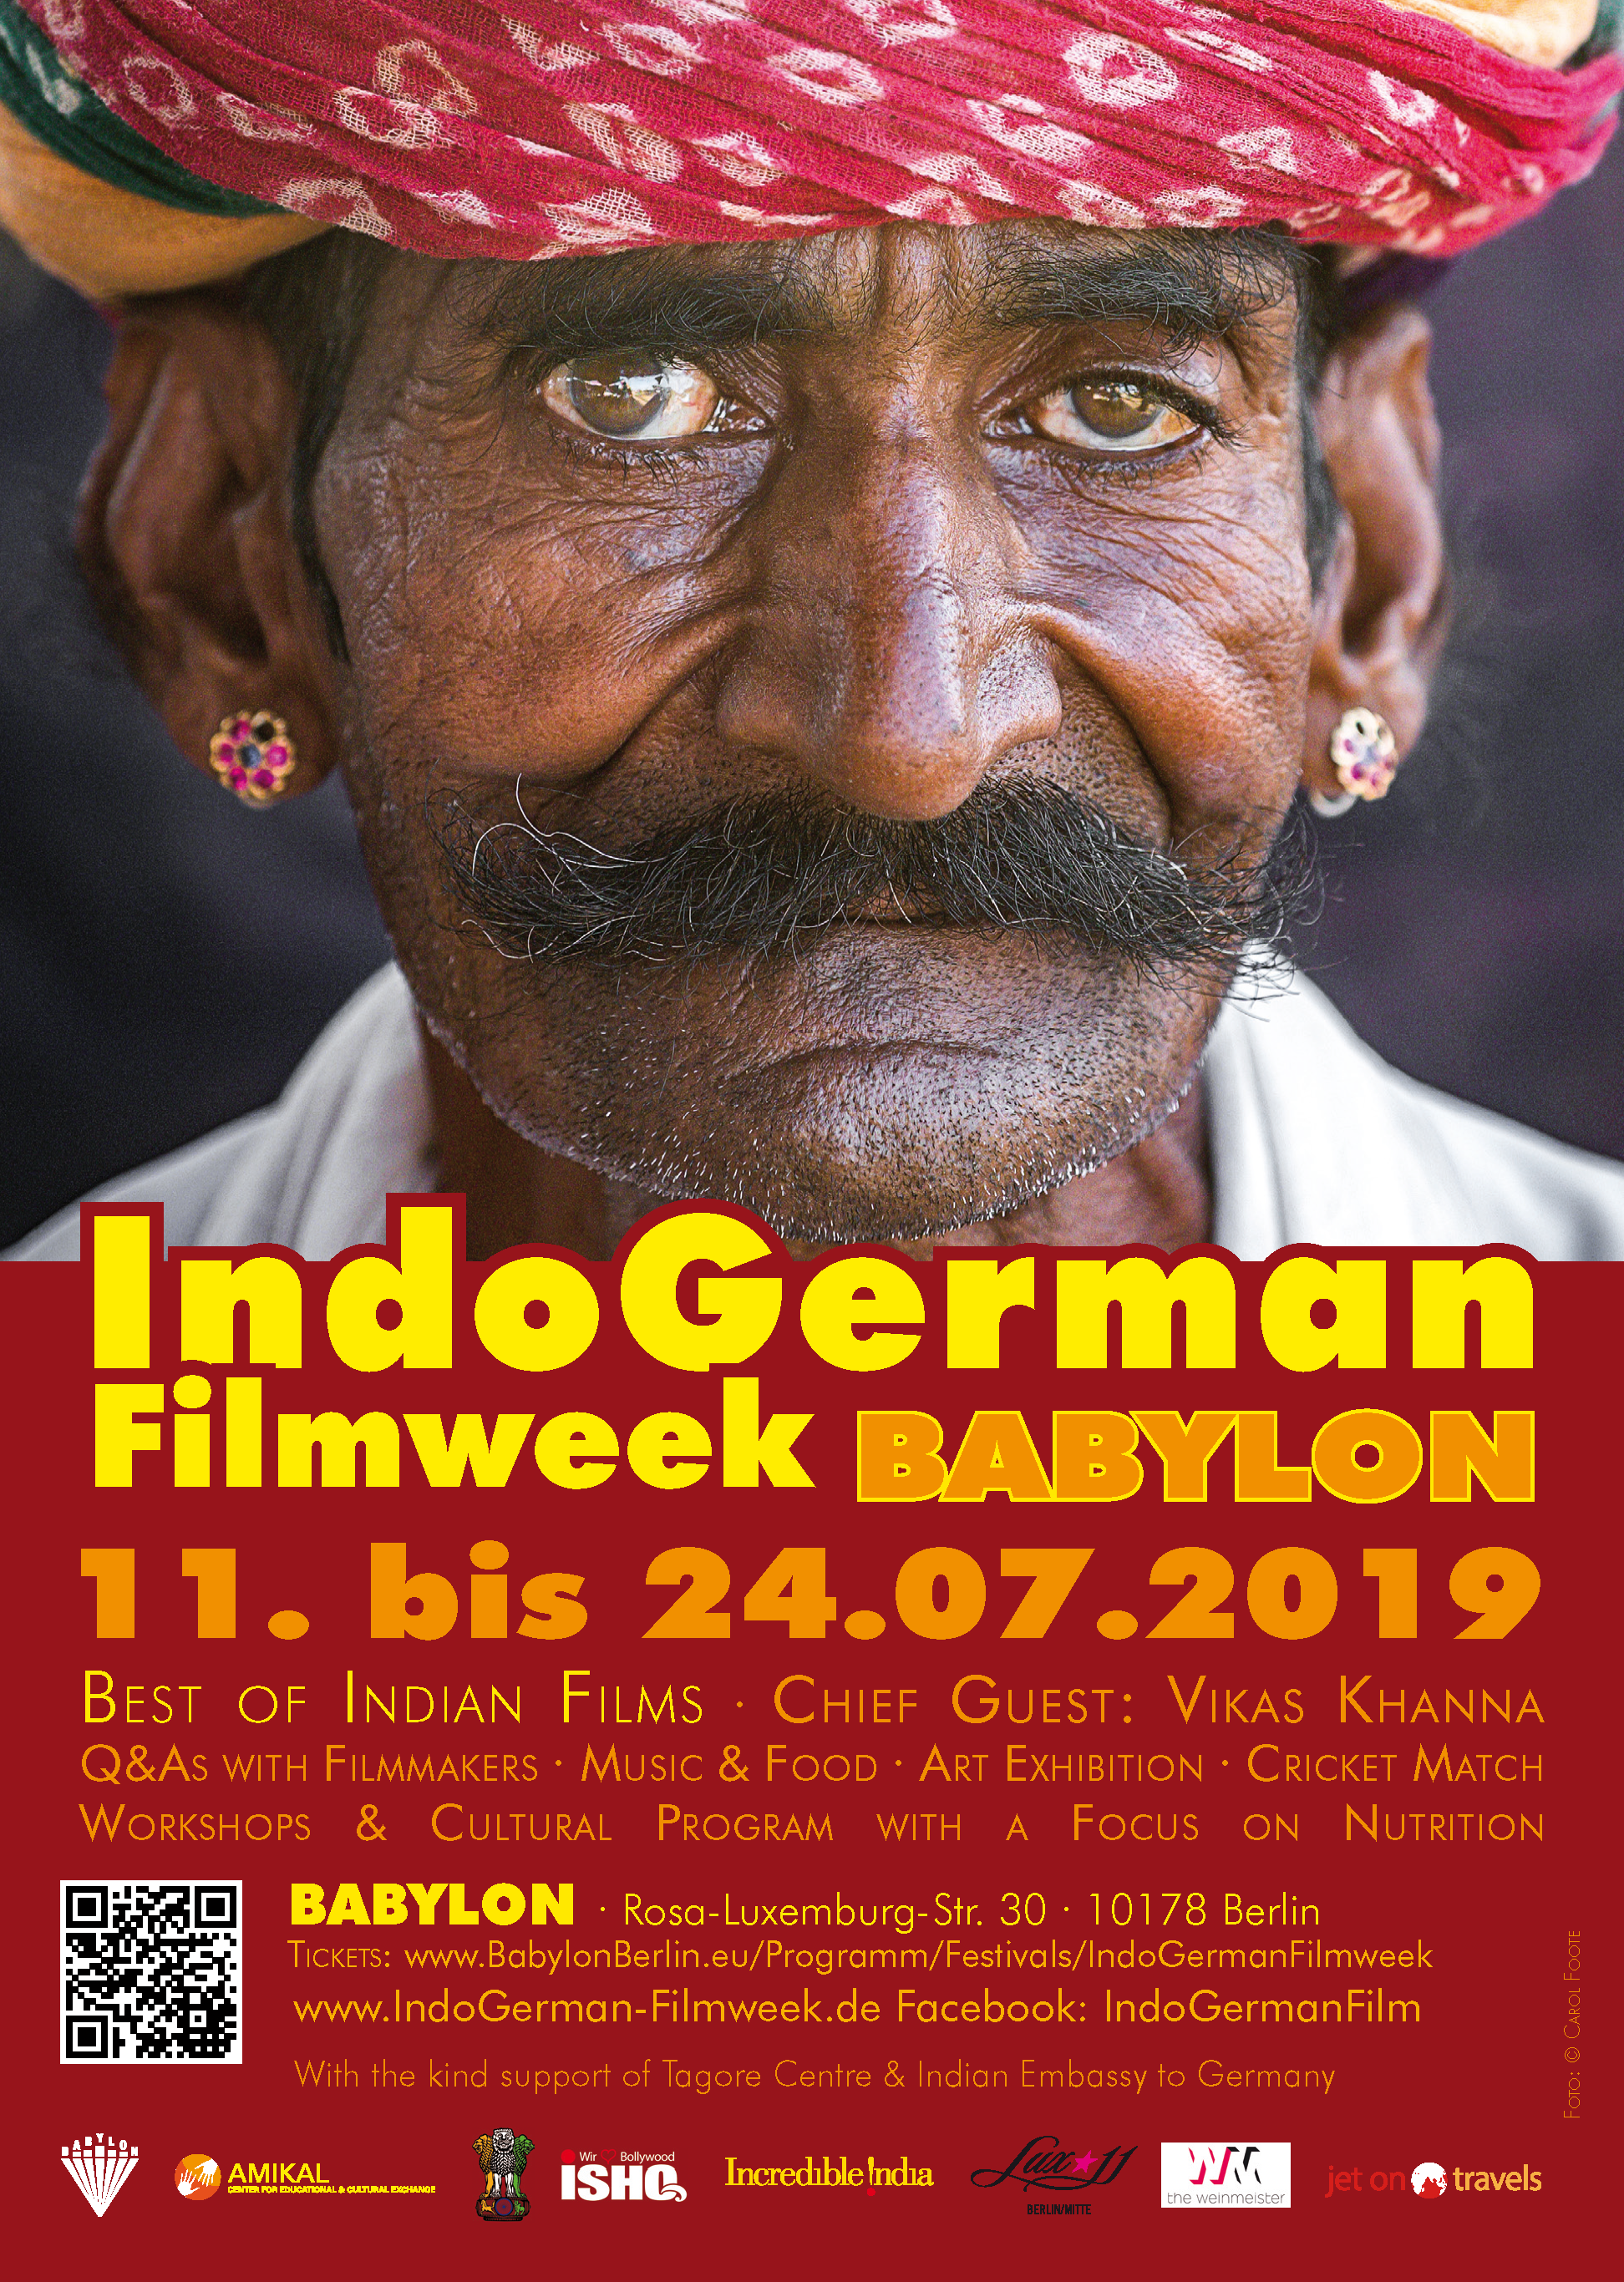 The last Color + 30 more Films and Cultural Events @IndoGerman Film Week